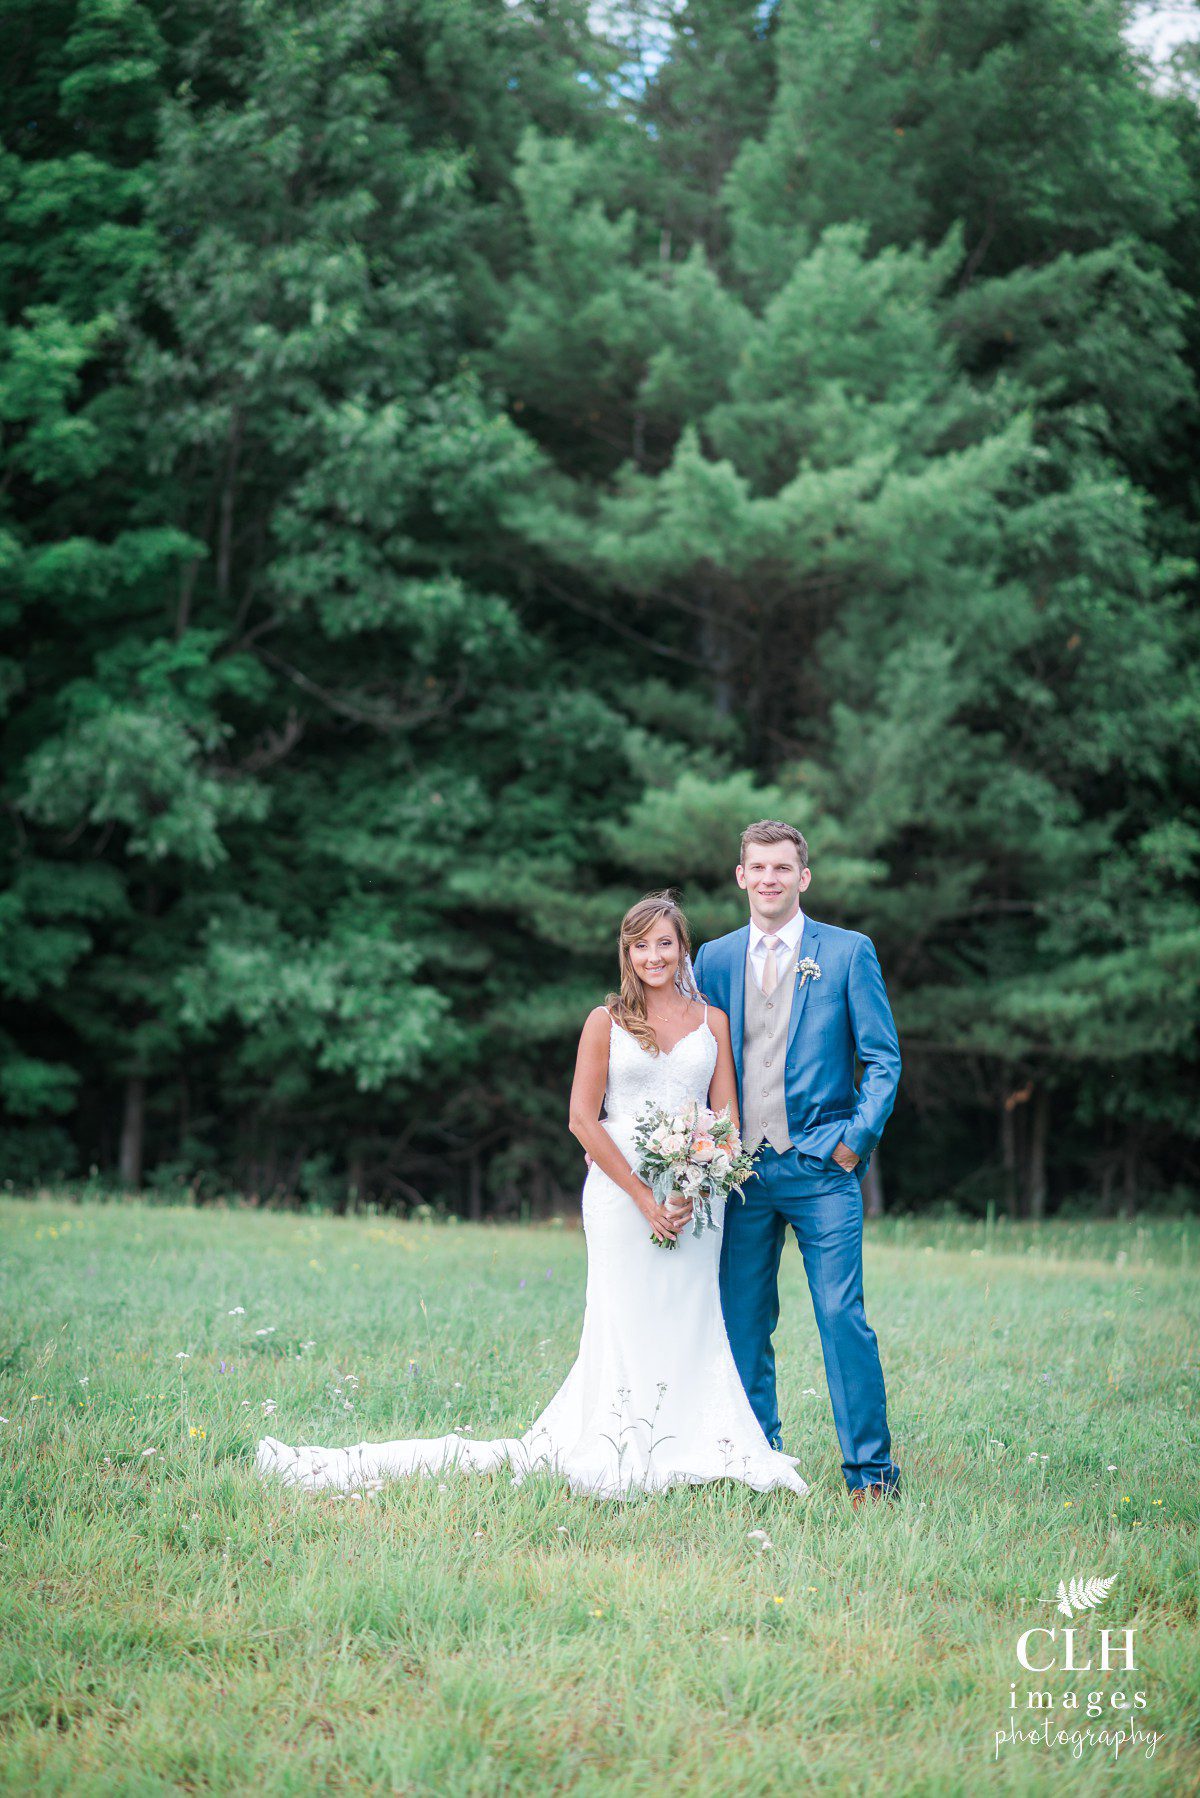 CLH images Photography - Adirondack Weddings - Adirondack Photographer - Rustic Wedding - Barn Wedding - Burlap and Beams Wedding - Jessica and Ryan (109)